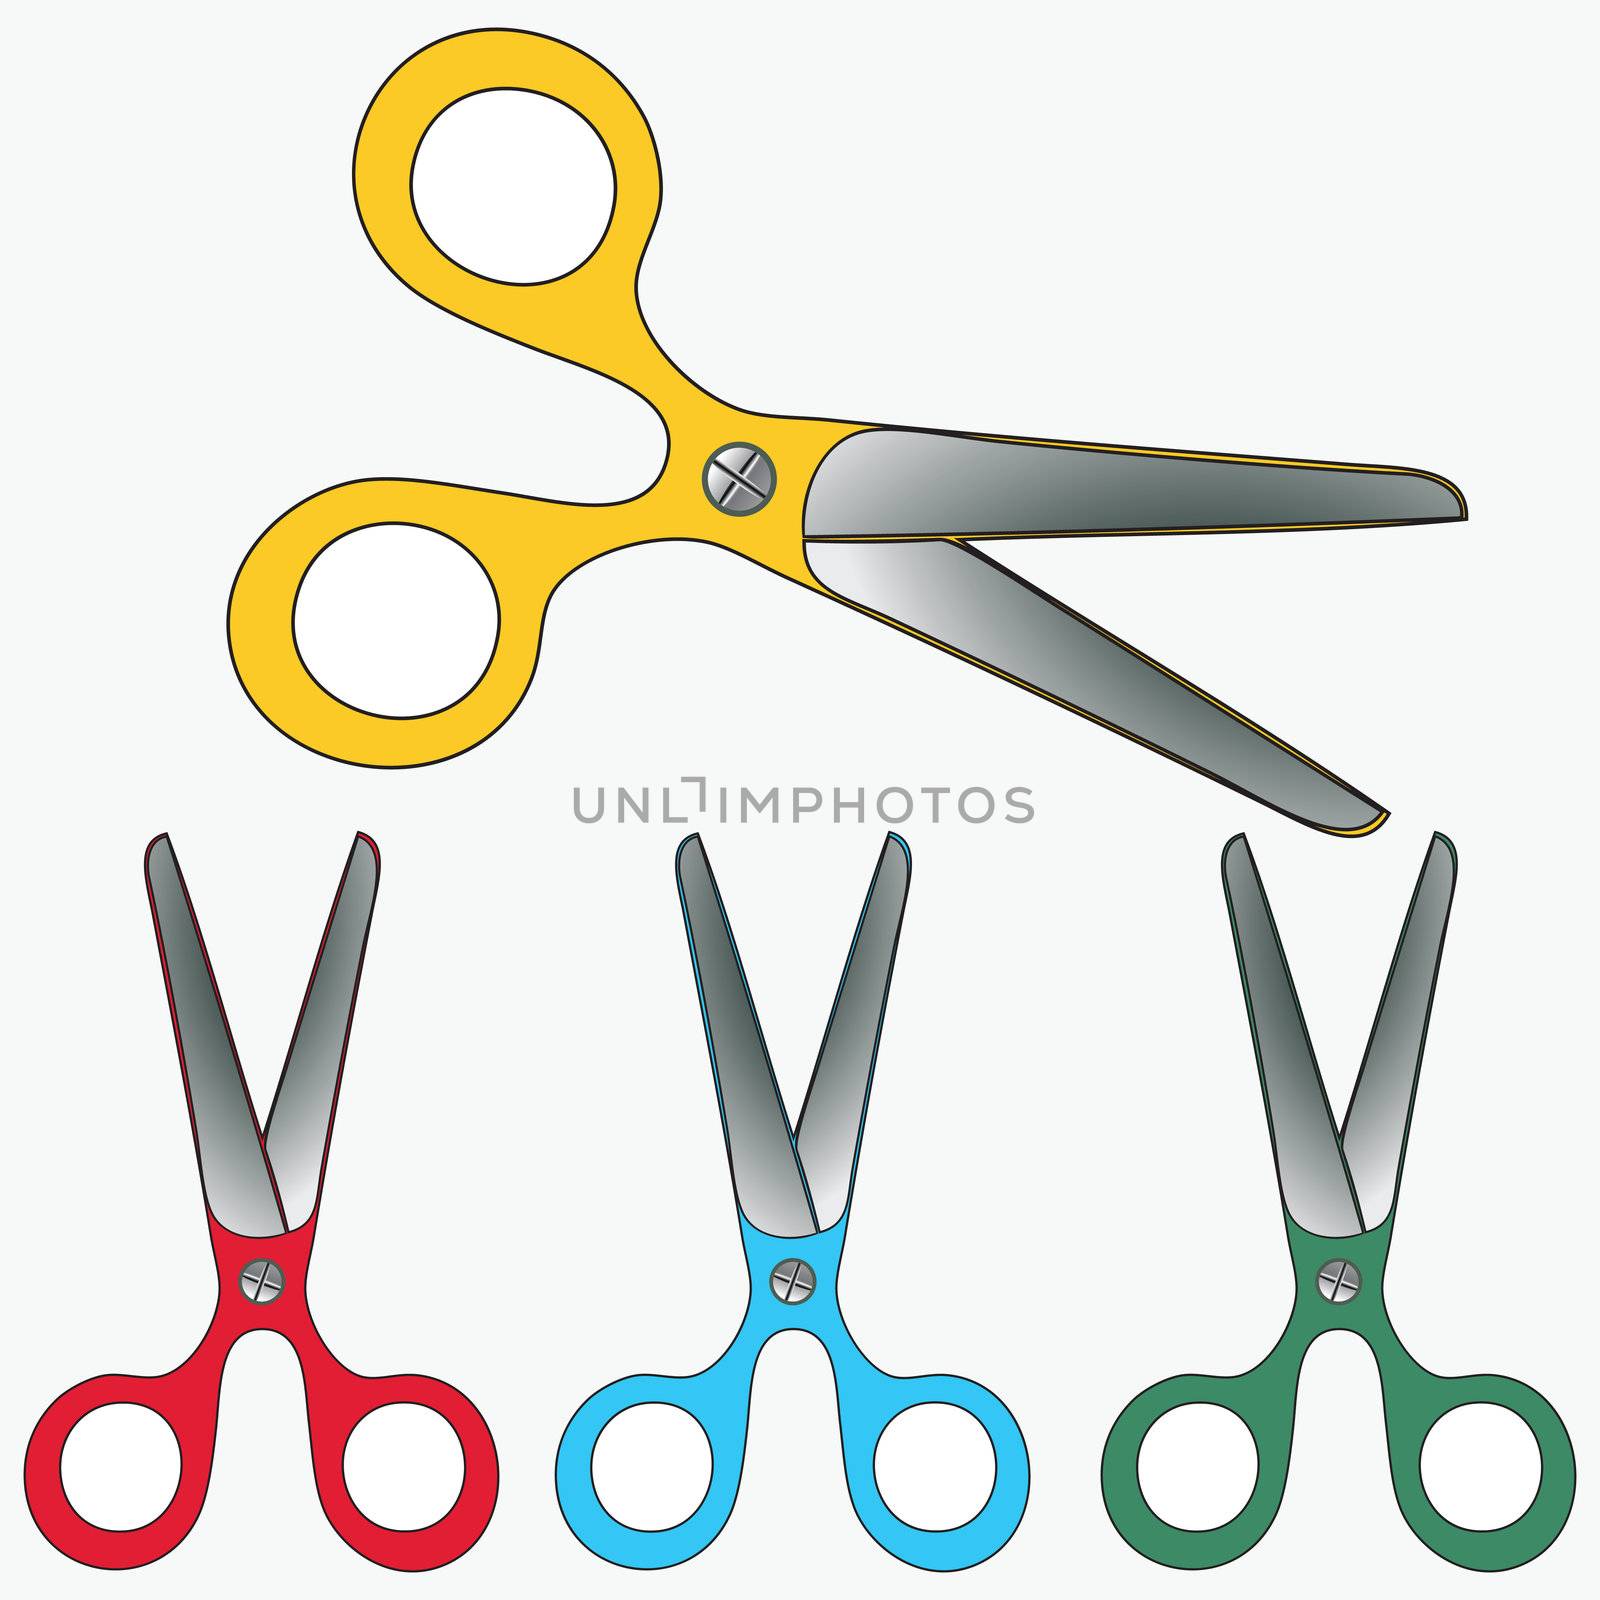 scissors collection against white background, abstract vector art illustration